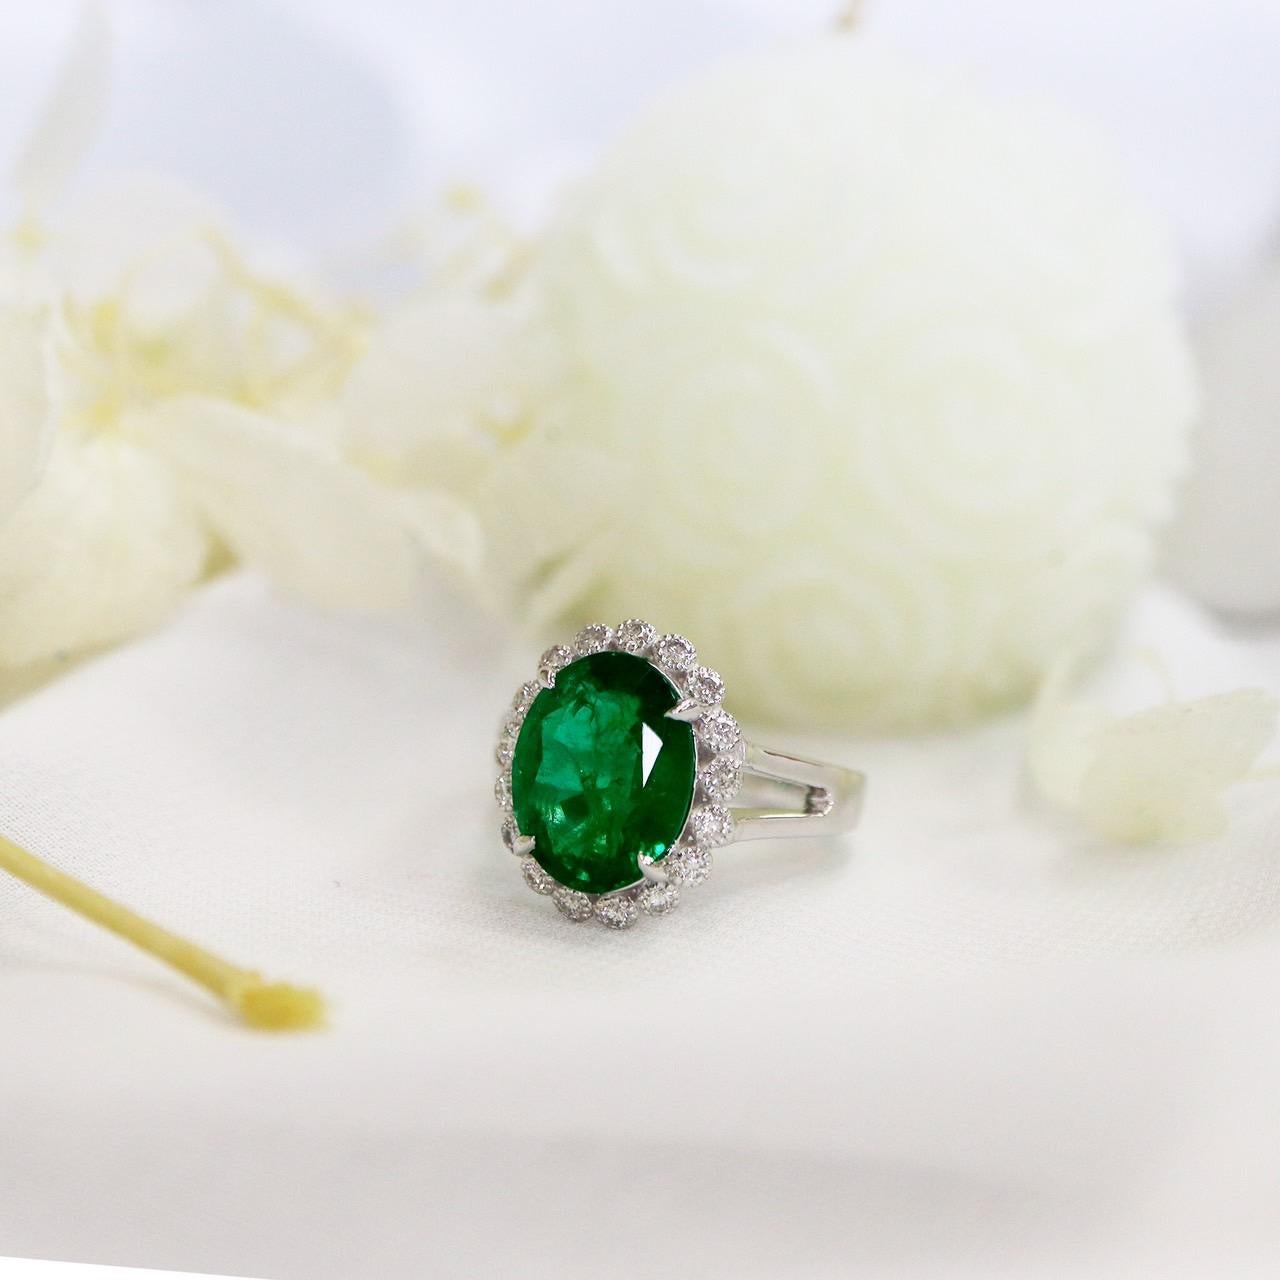 IGI 18K 3.59 C Emerald&Diamond Antique Art Deco Style Engagement Ring In New Condition For Sale In Kaohsiung City, TW